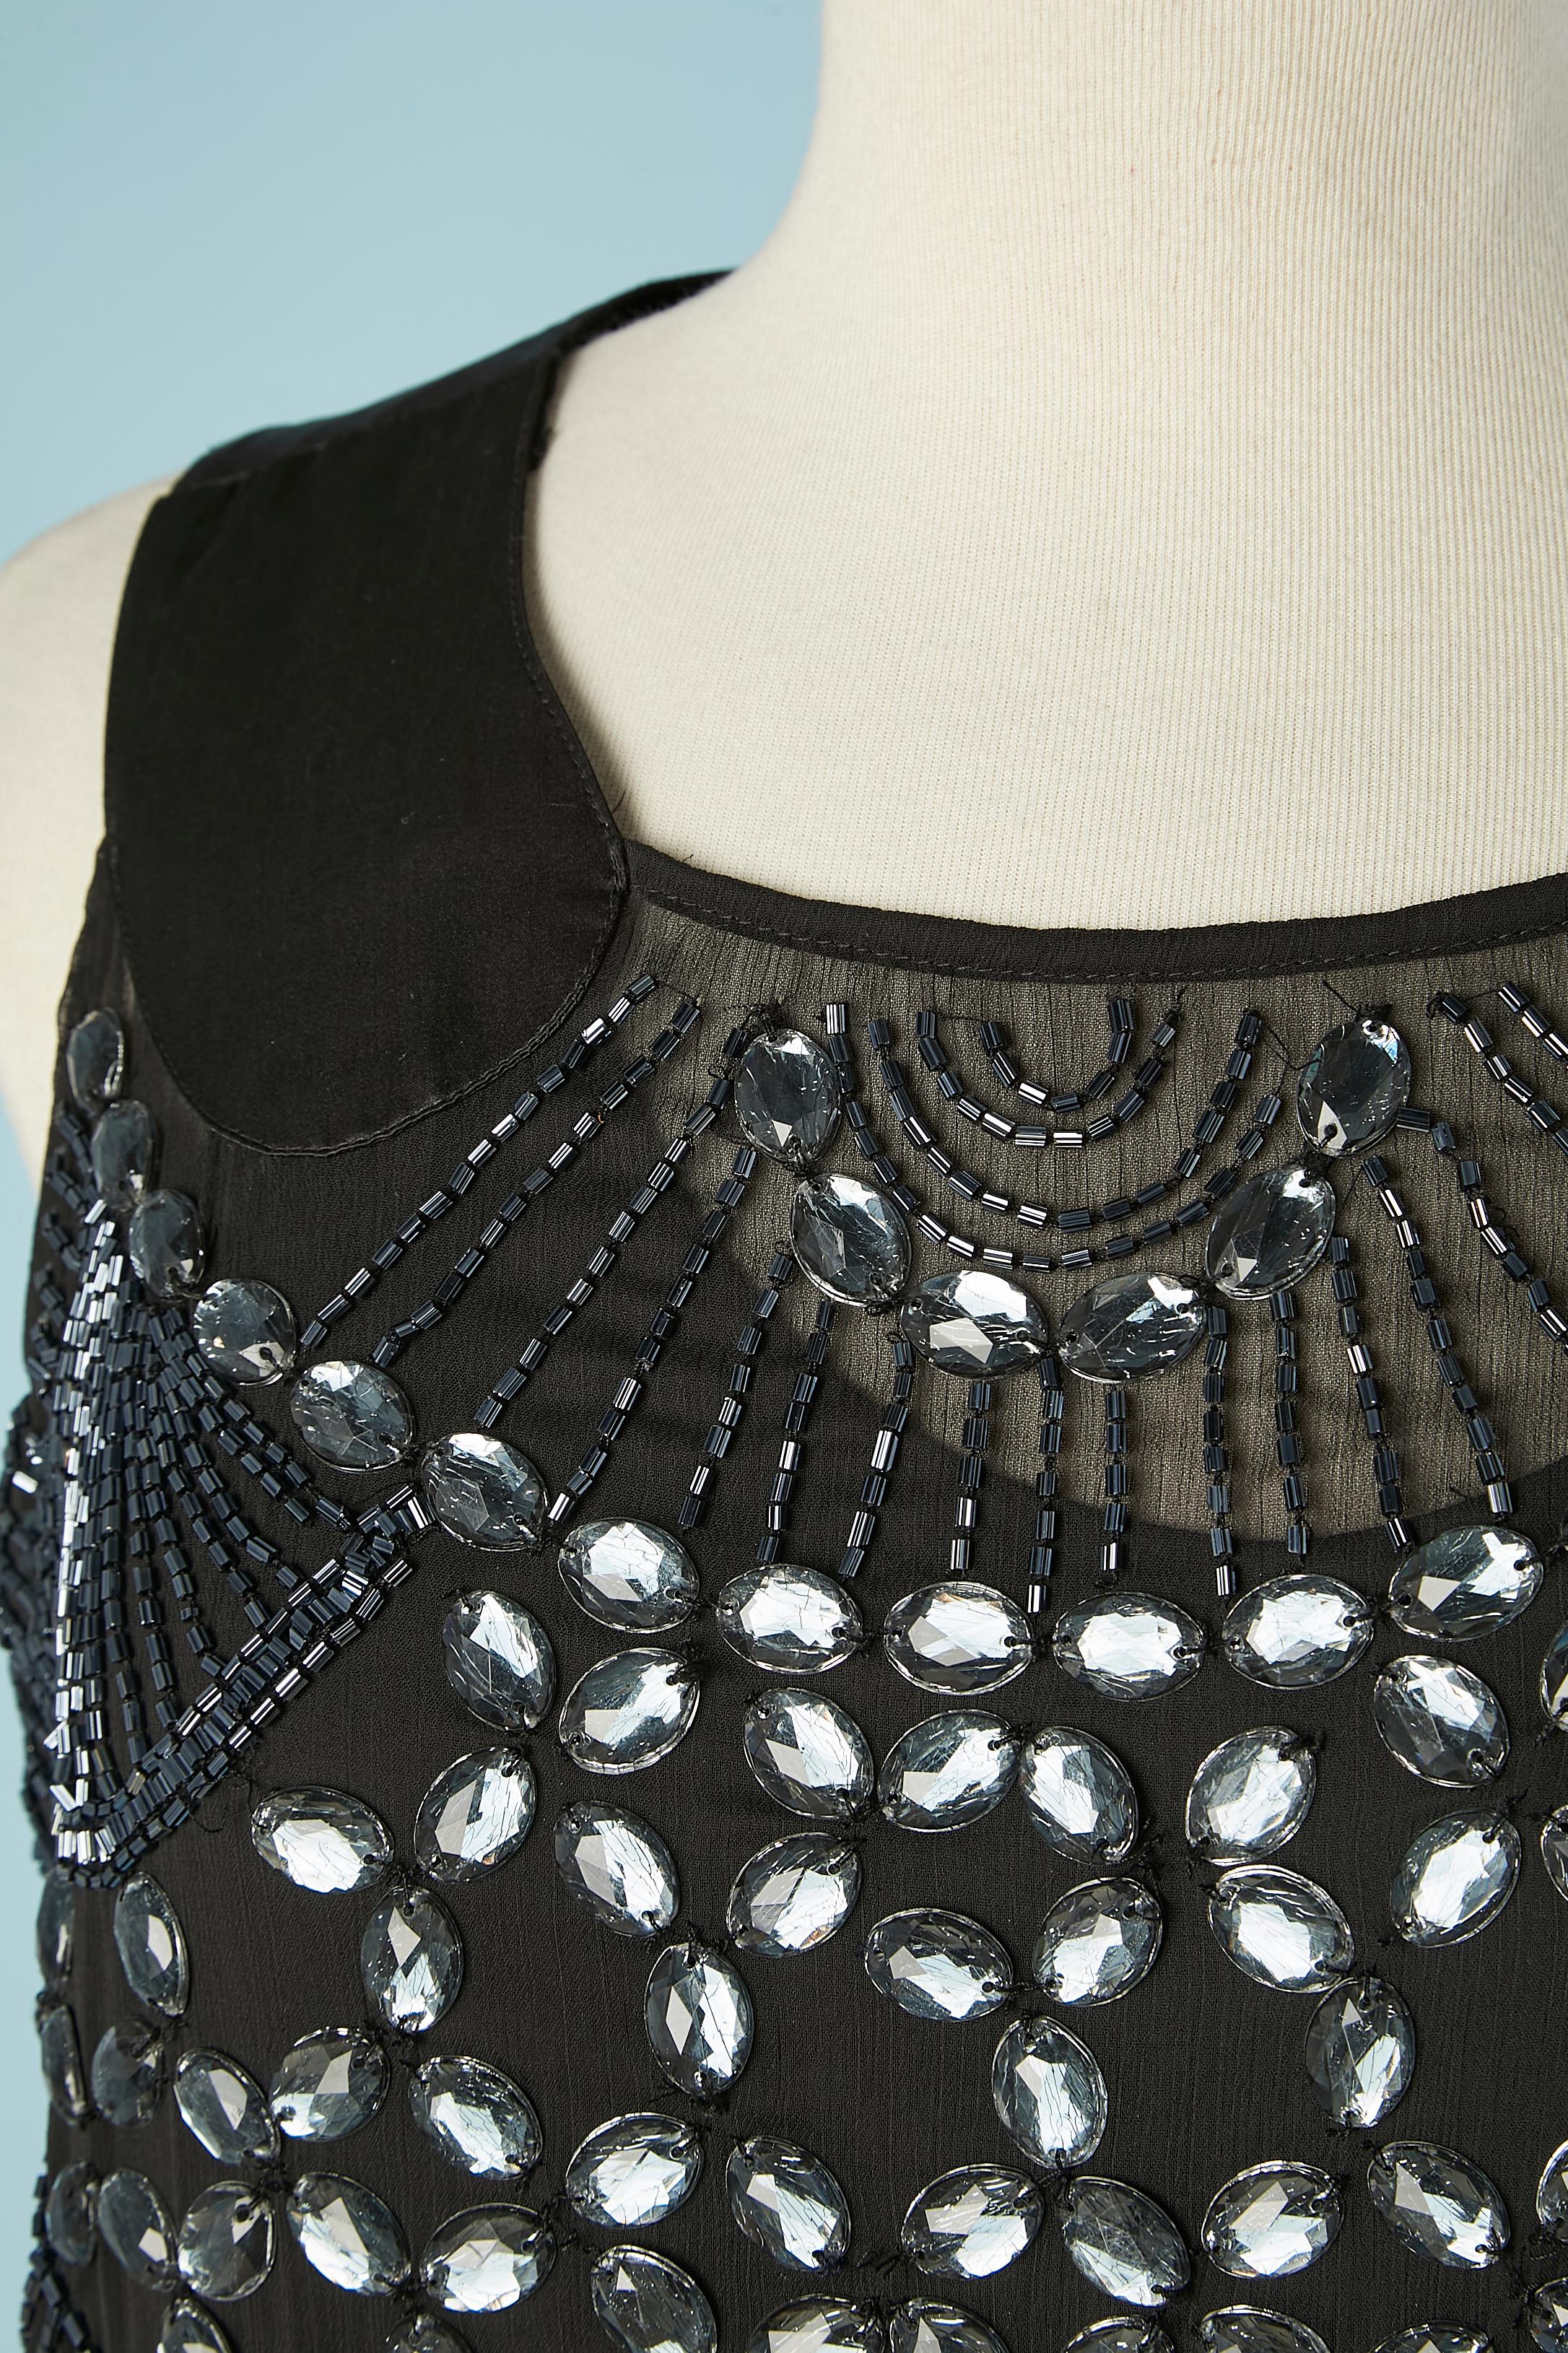 Black full beaded sleeveless cocktail dress. Shell composition: 100% polyester + beads and rhinestone. Lining: 100% rayon 
SIZE: 8 US 